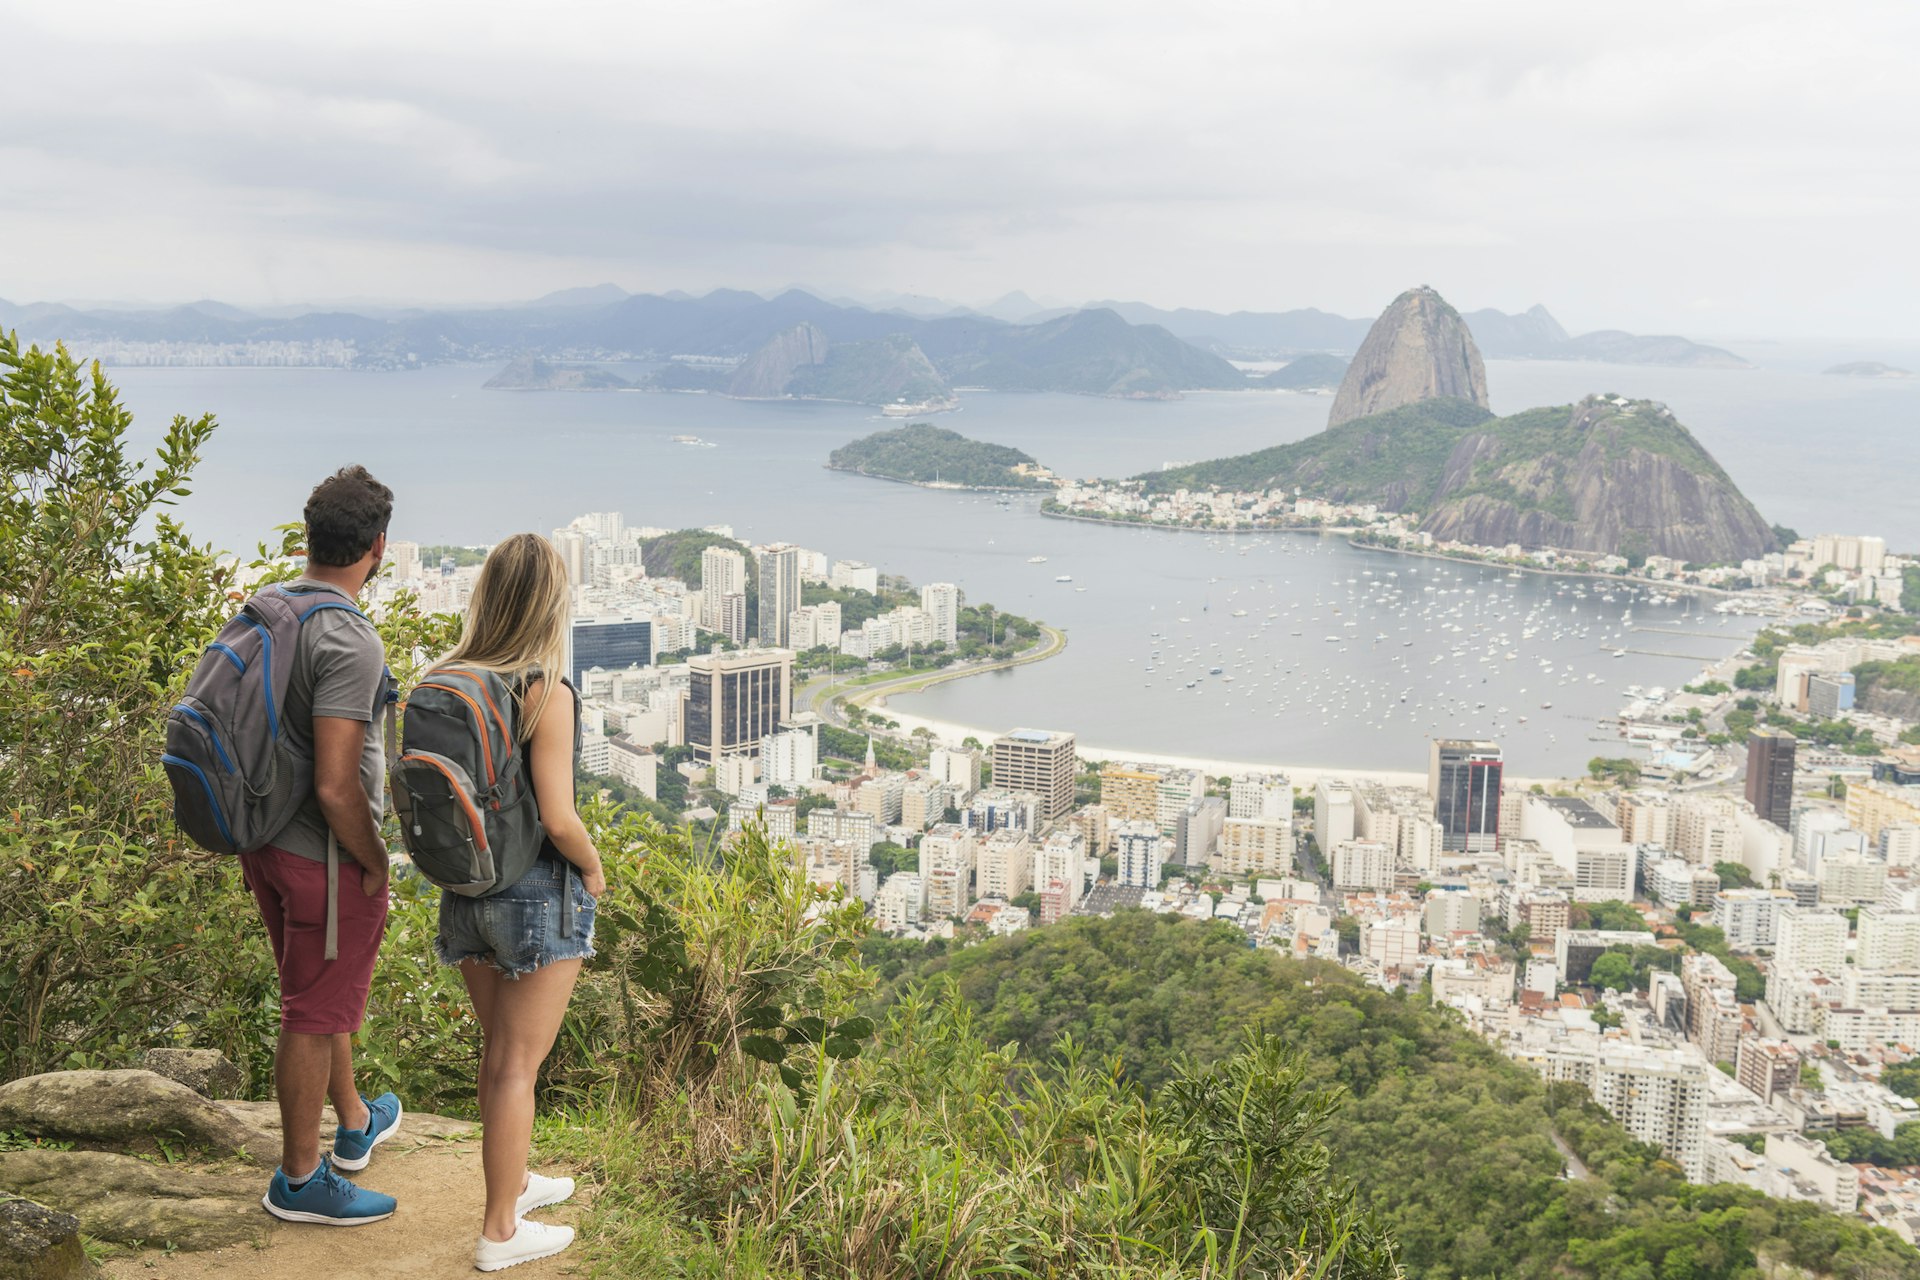 Backpacking tourists standing with views over a bay backed by a mountain